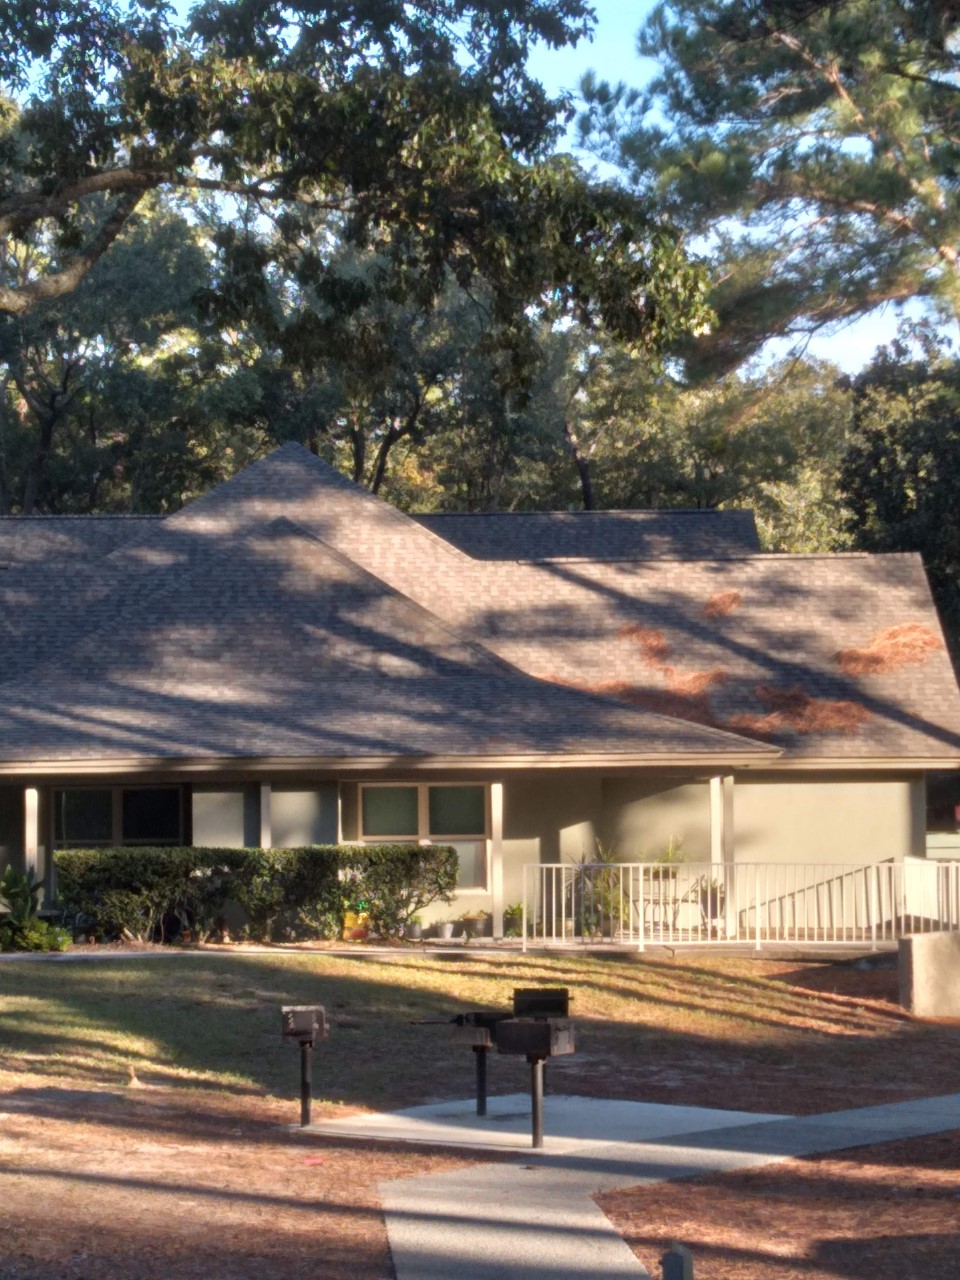 Photo of 90 DILLON APARTMENTS. Affordable housing located at 90 DILLON ROAD HILTON HEAD, SC 29926